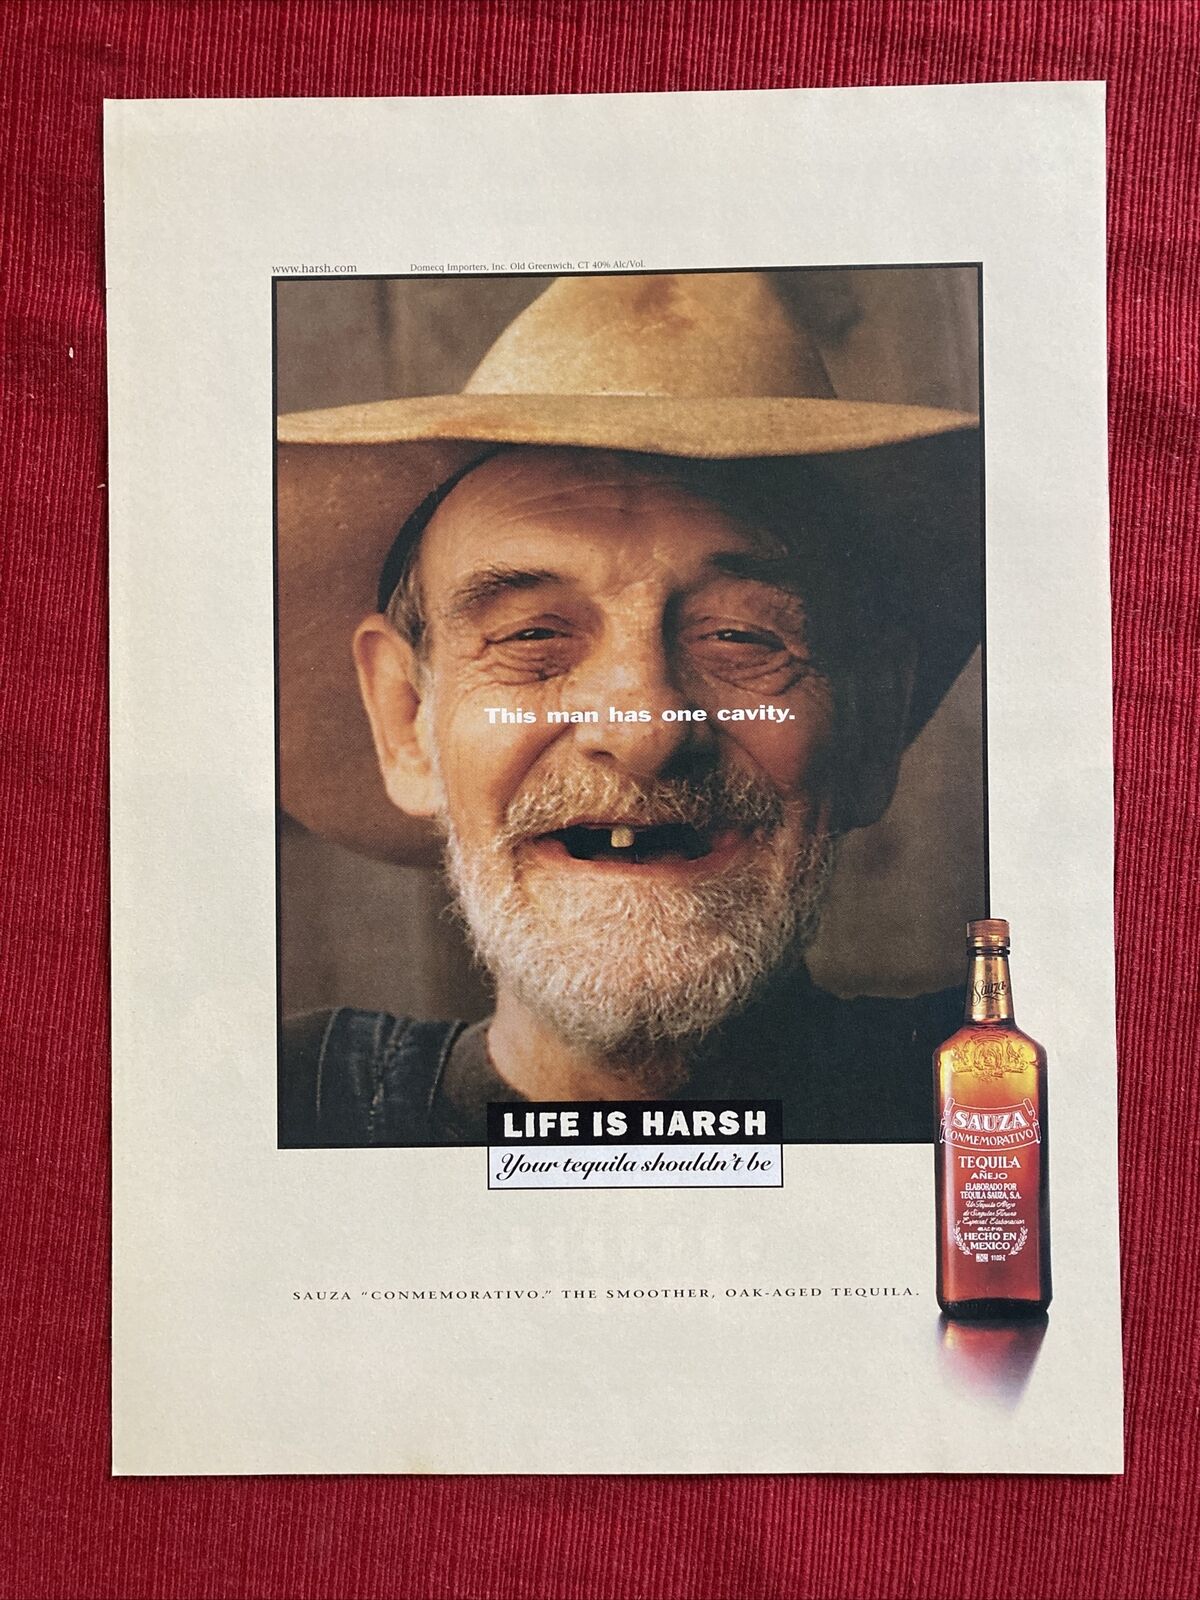 Sauza “Conmemorativo” Tequila Missing Teeth 1997 Print Ad - Great To Frame